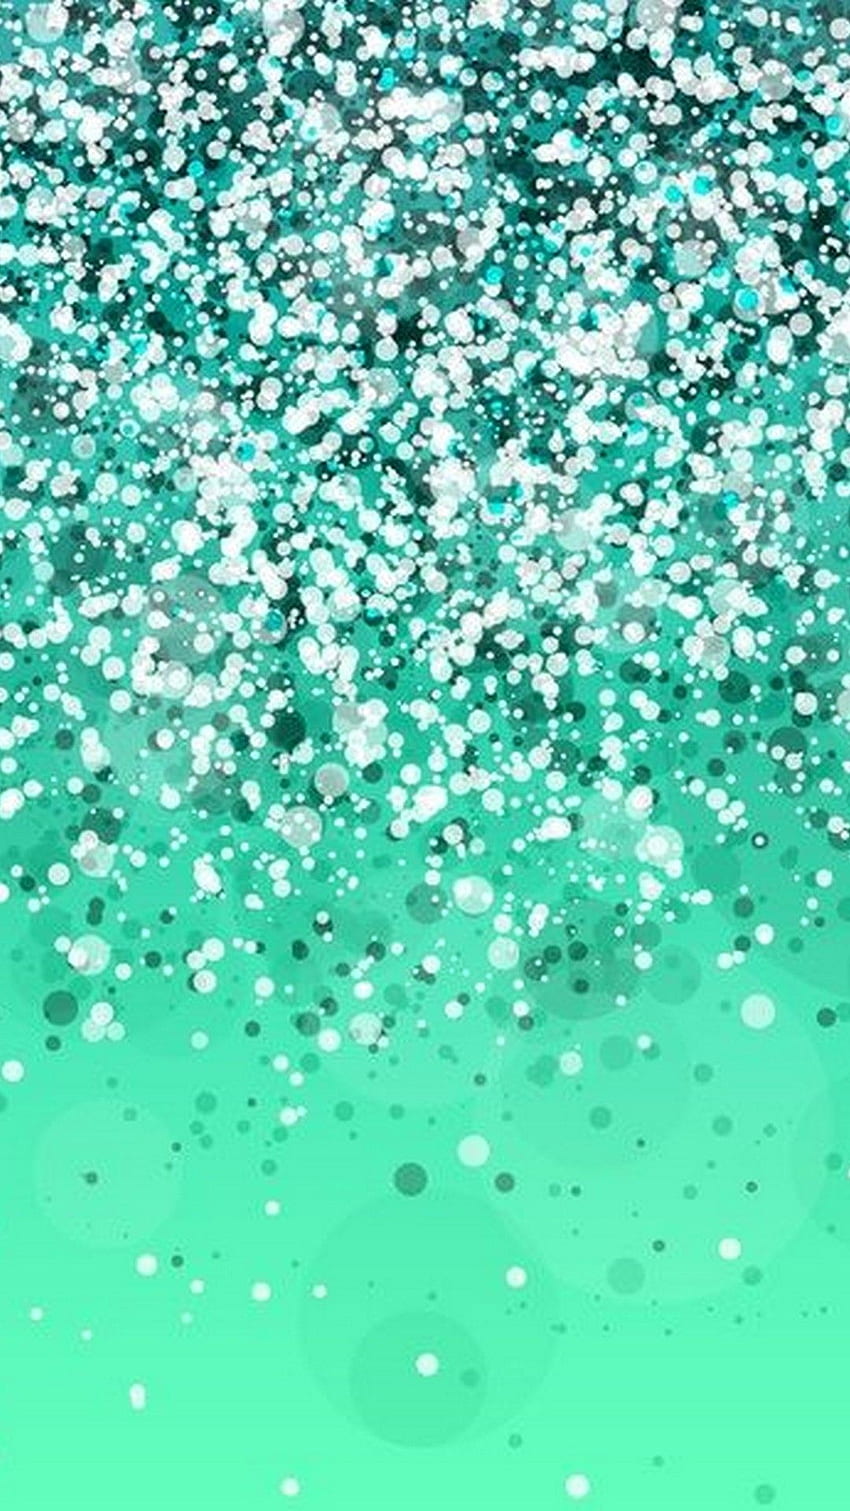 Green Glitter Background Images Browse 670622 Stock Photos  Vectors Free  Download with Trial  Shutterstock